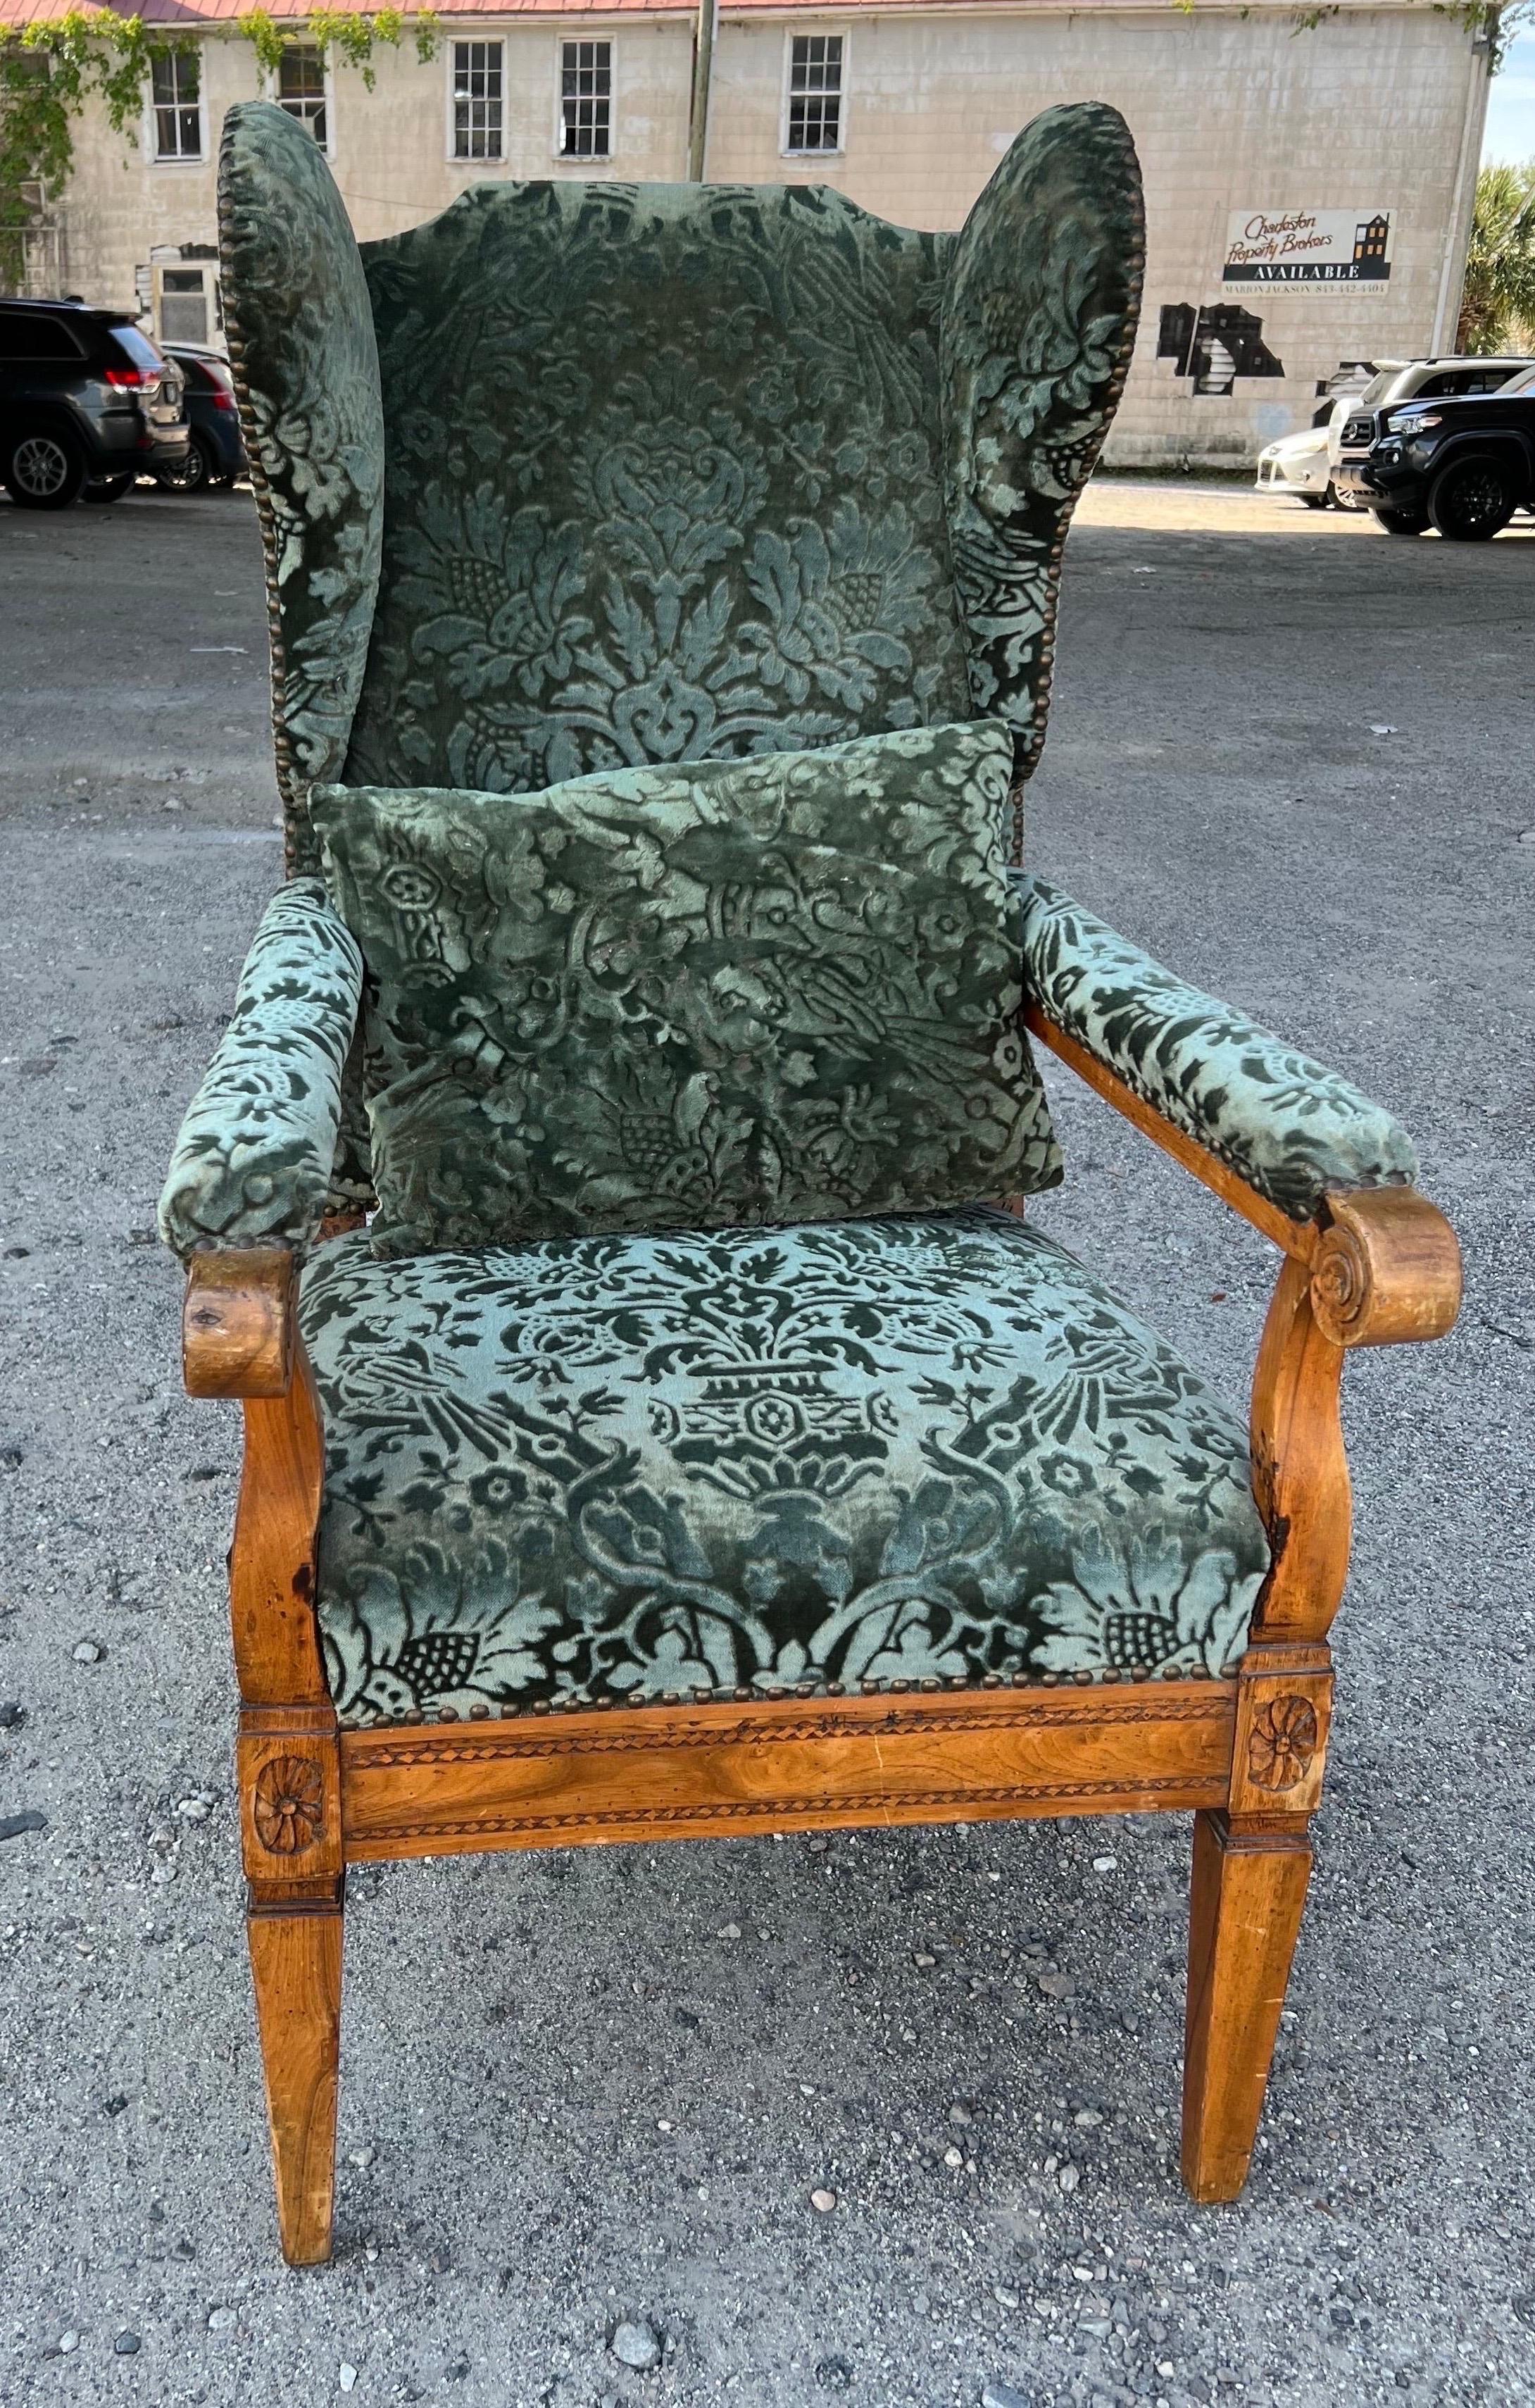 18th Century French Fruitwood Fauteuil À Oreills in Fortuny Fabric with pillow. Rich honey colored fruitwood with scrolled arms and carved patera on knees paired with elegant Fortuny fabric and matching pillow.